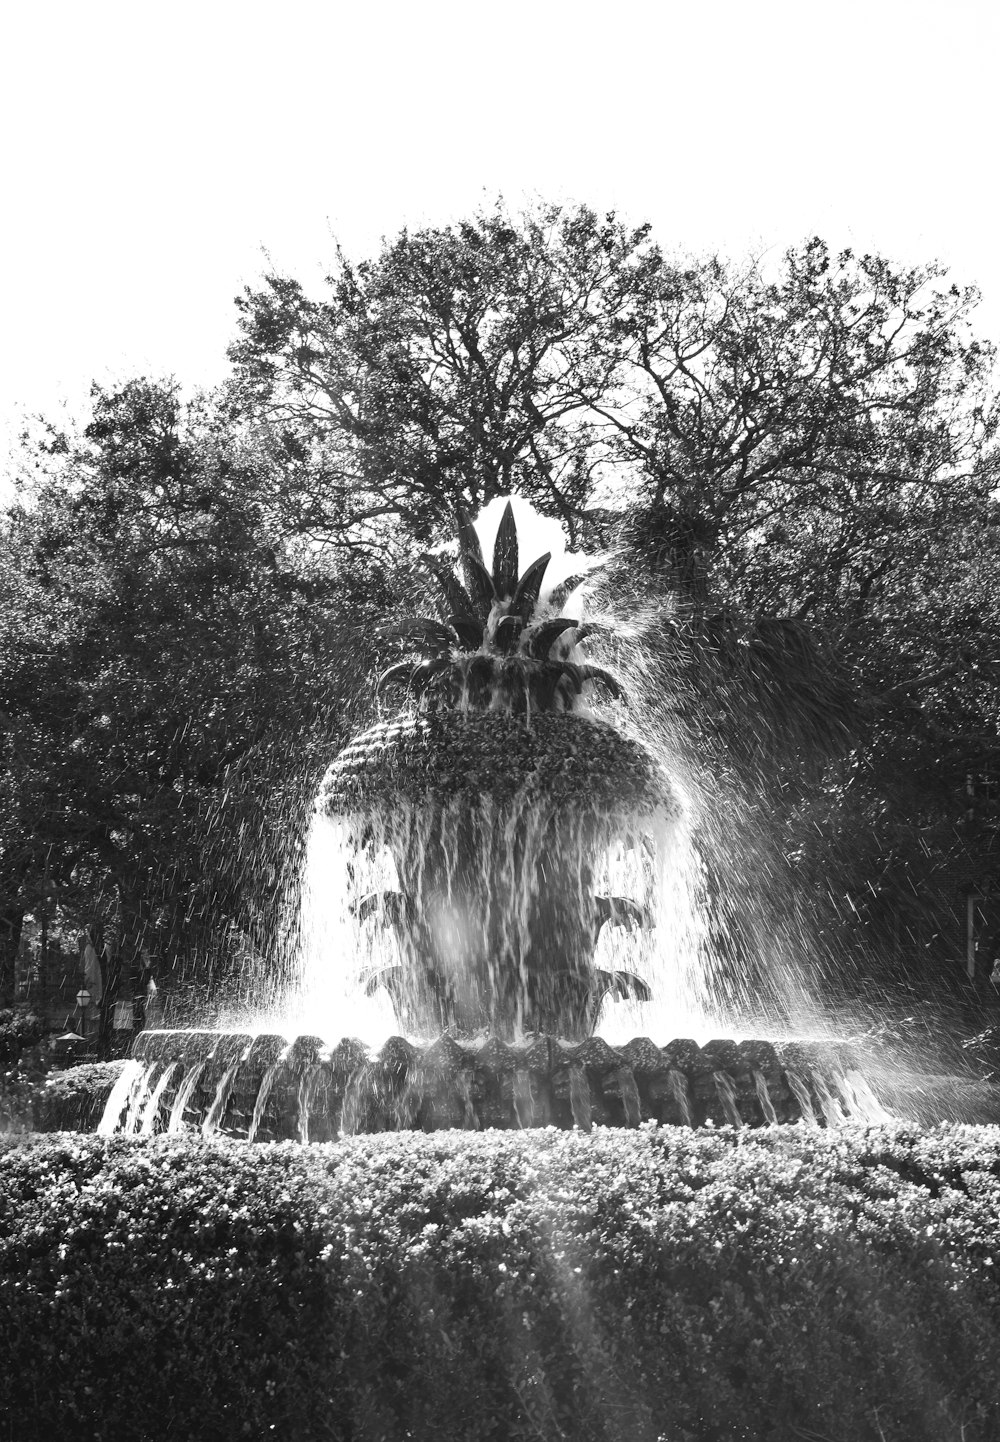 a black and white photo of a fountain